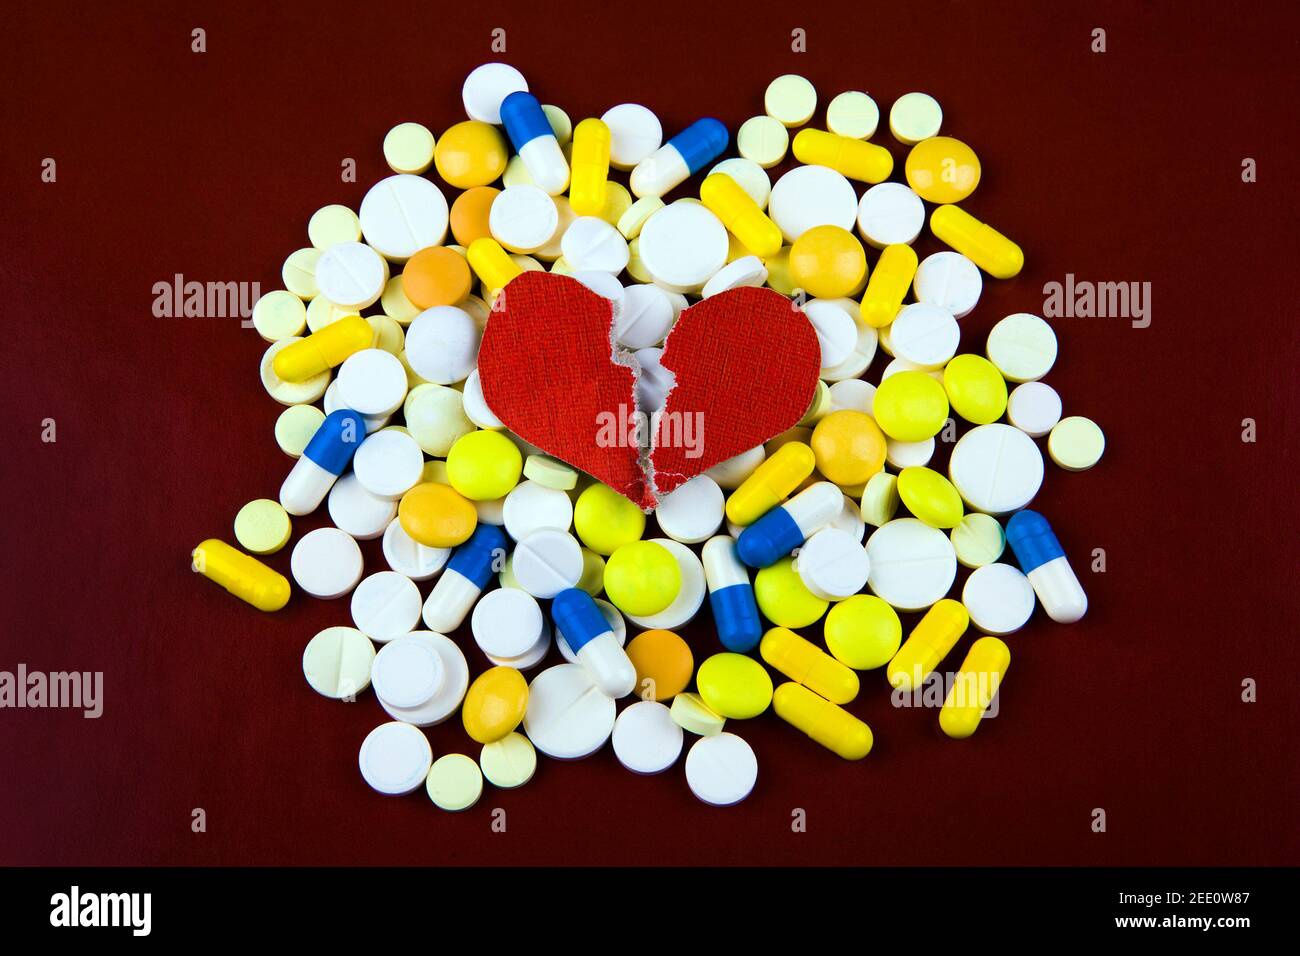 Broken Red Heart Shape with a Pills on the Paper Background Stock Photo